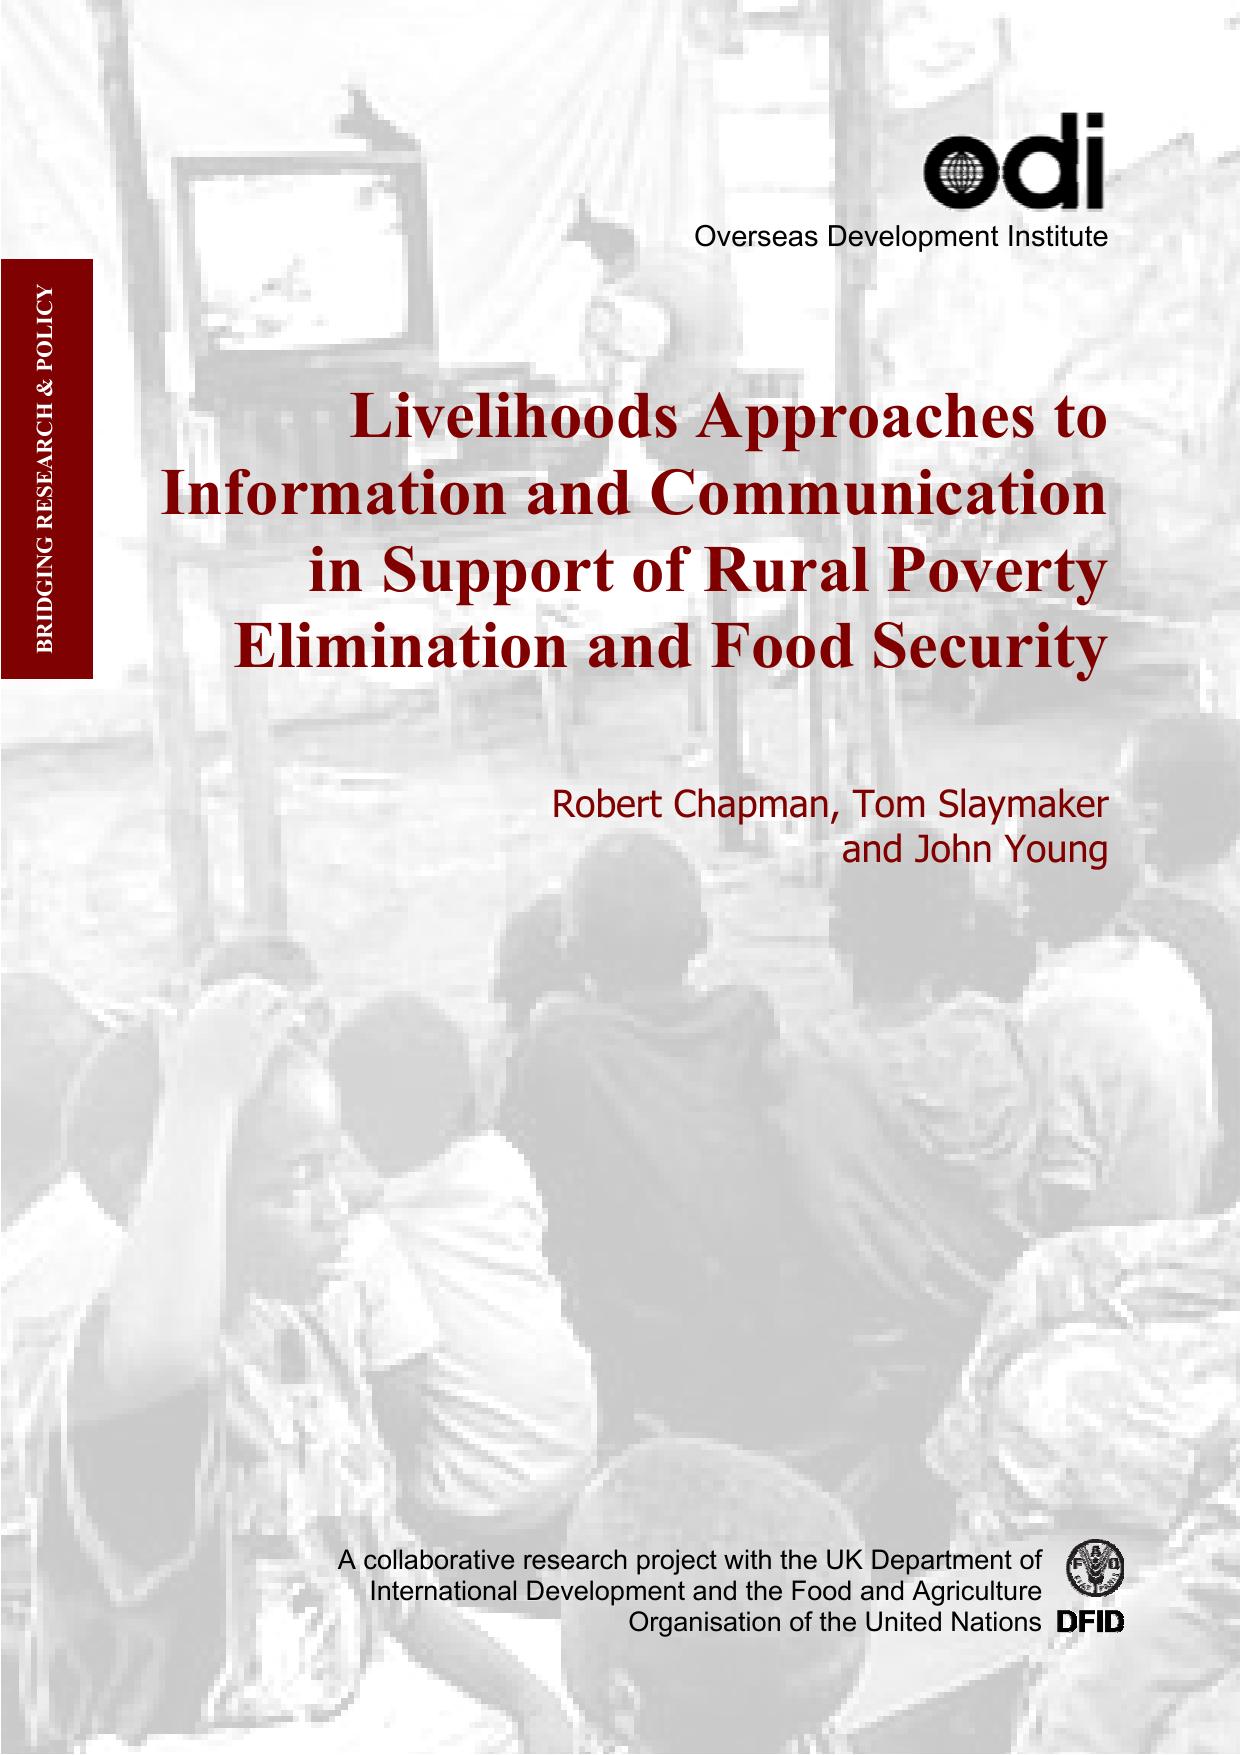 Livelihoods Approaches to Information and Communication in Support of Rural Poverty Elimination and Food Security - Report